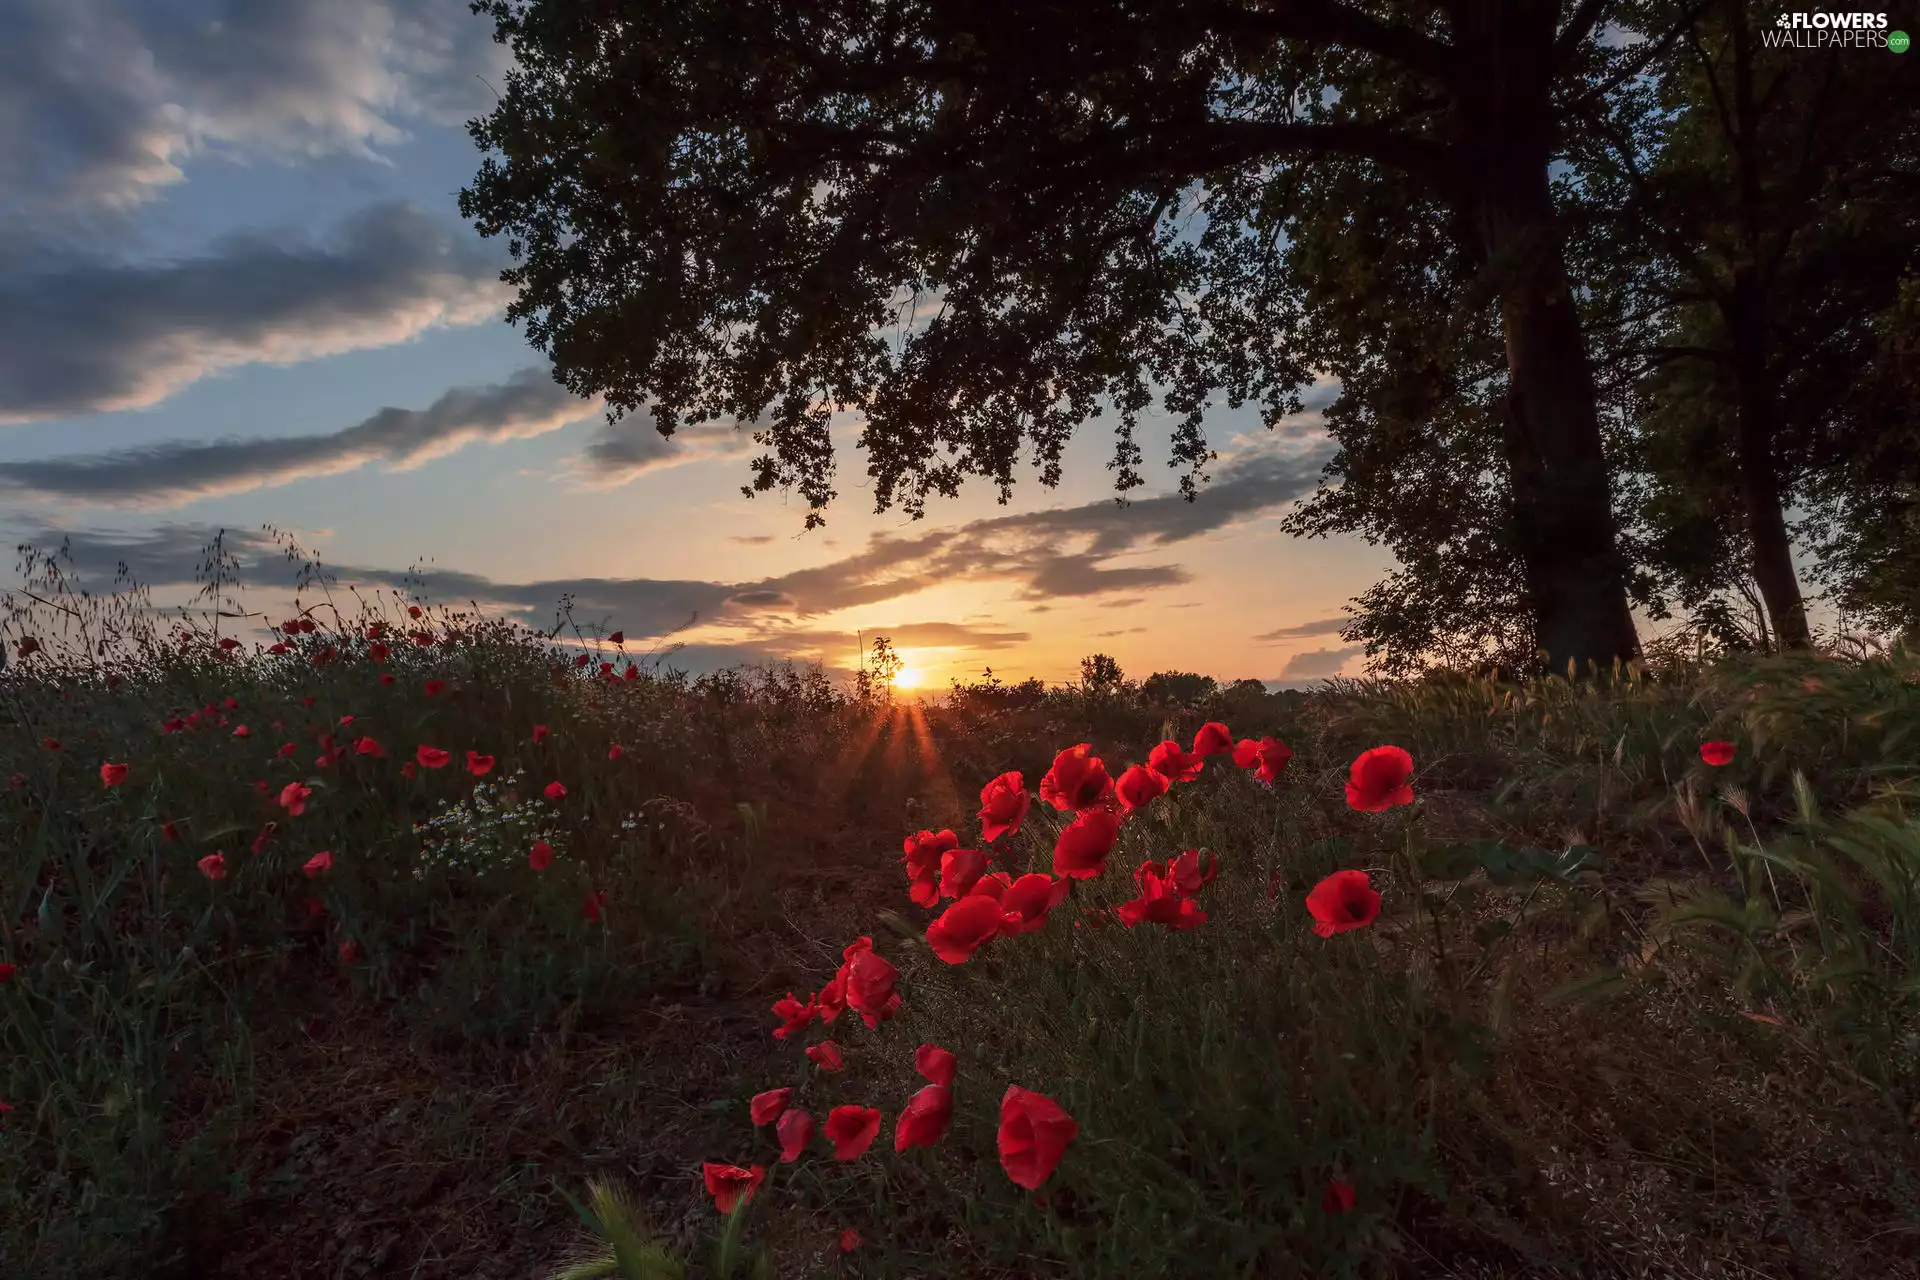 Flowers, Field, papavers, Red, evening, Great Sunsets, viewes, clouds, trees